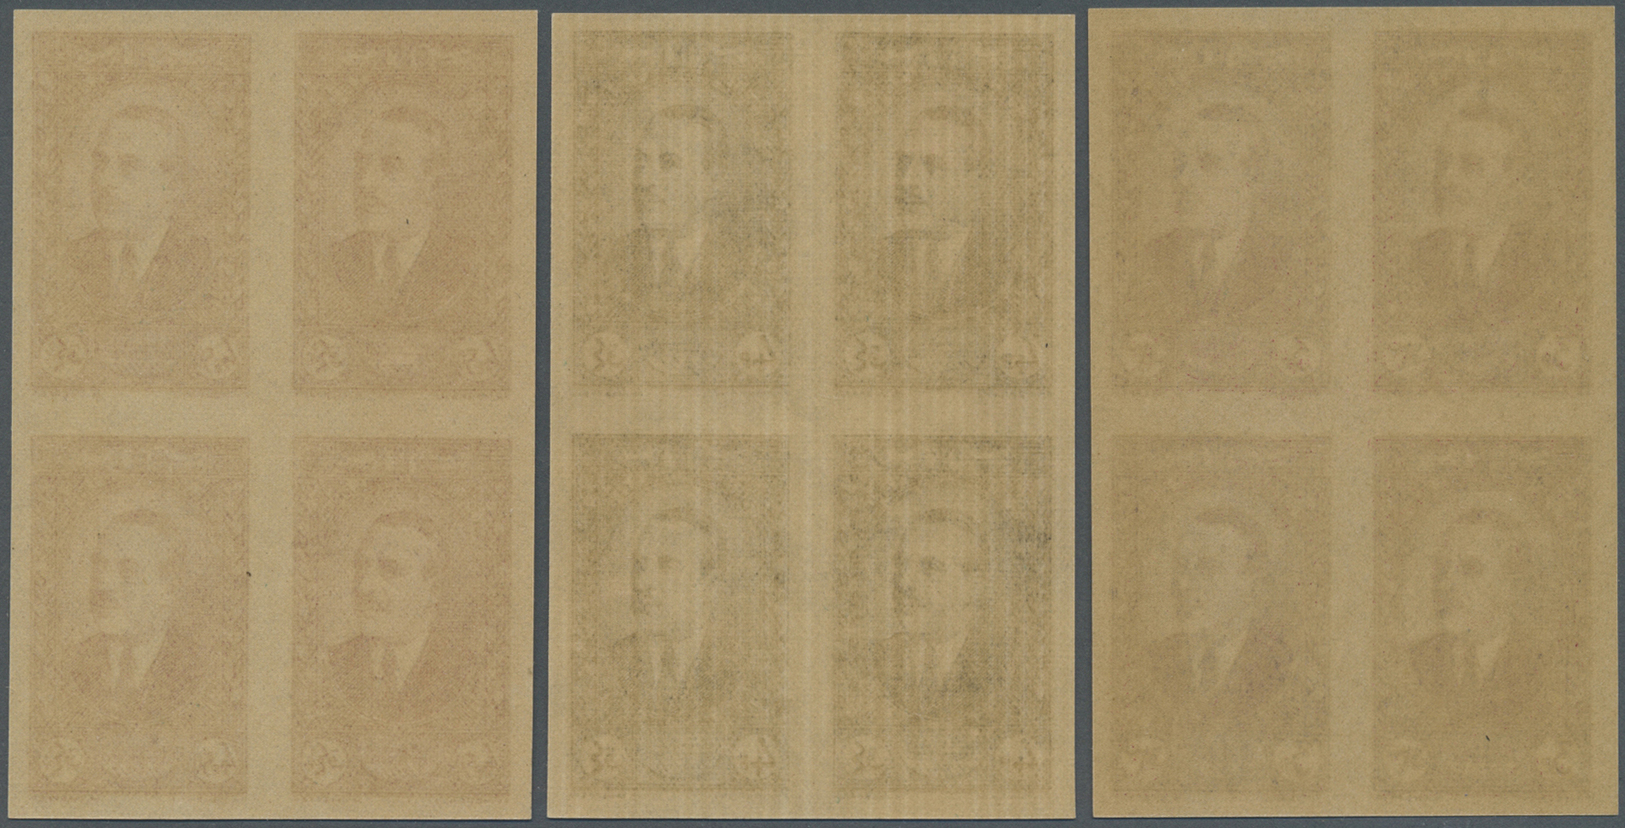 ** Libanon: 1937/1940, Definitives 0.10pi. to 100pi., 16 values complete (excl. 7.50pi.), IMPERFORATE blocks of four, un